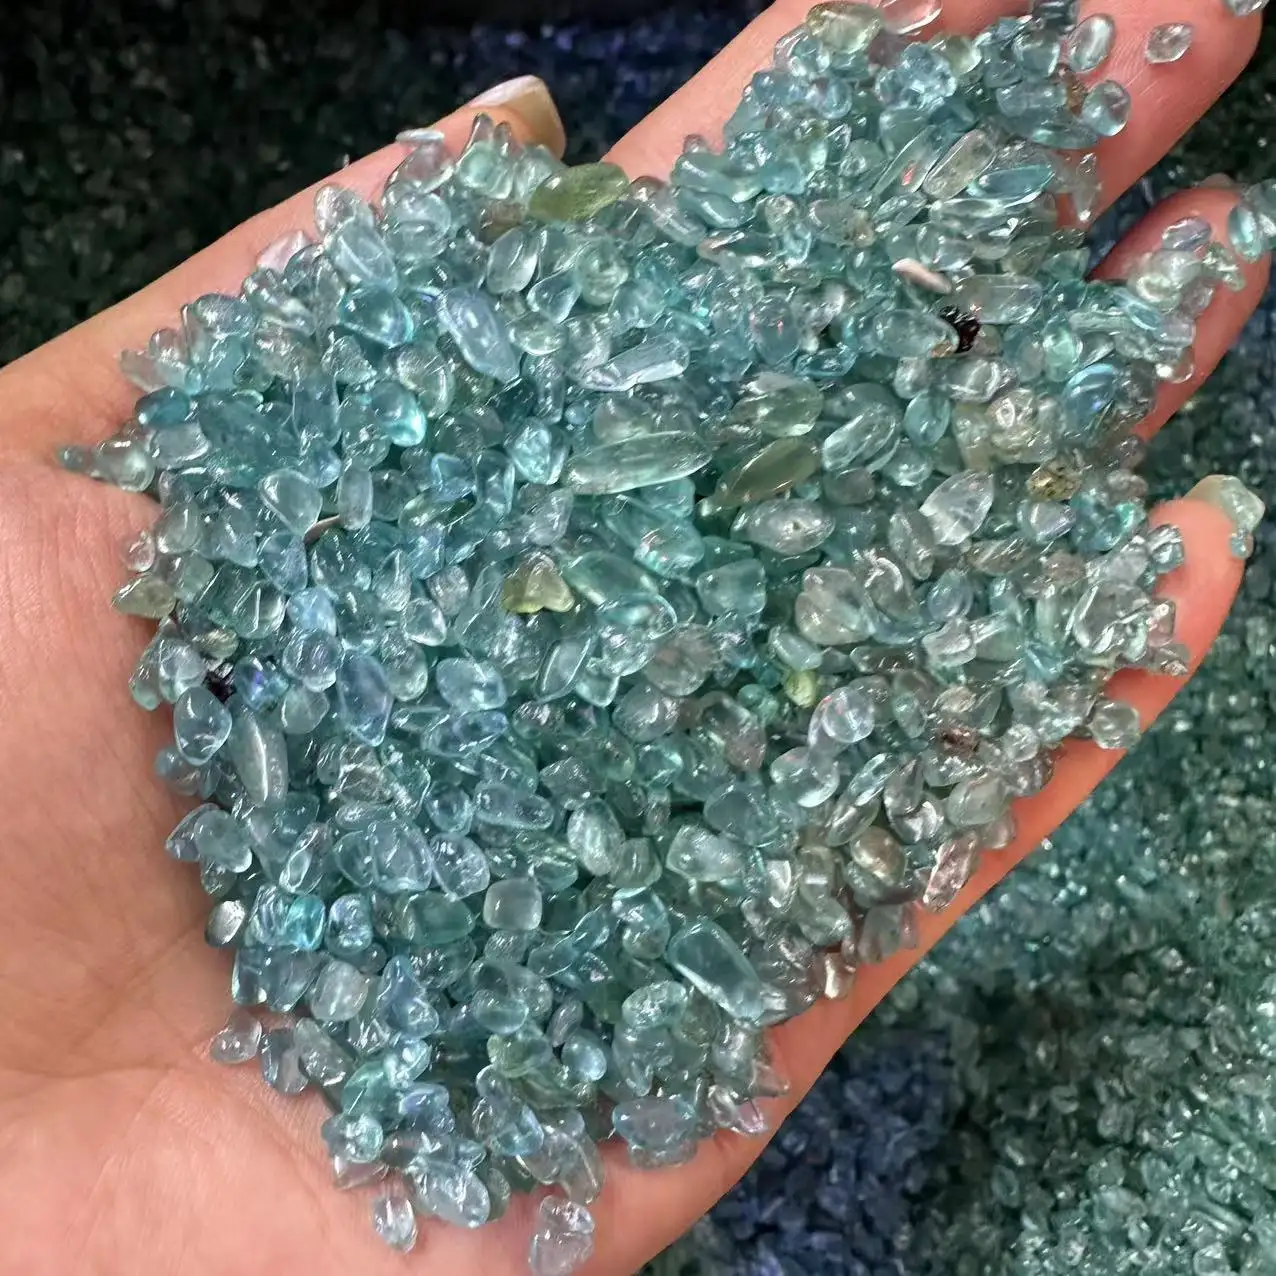 Wholesale bulk Natural HIgh quality blue apatite Crystals Stones Gemstone Healing Rough Chip for fen shui